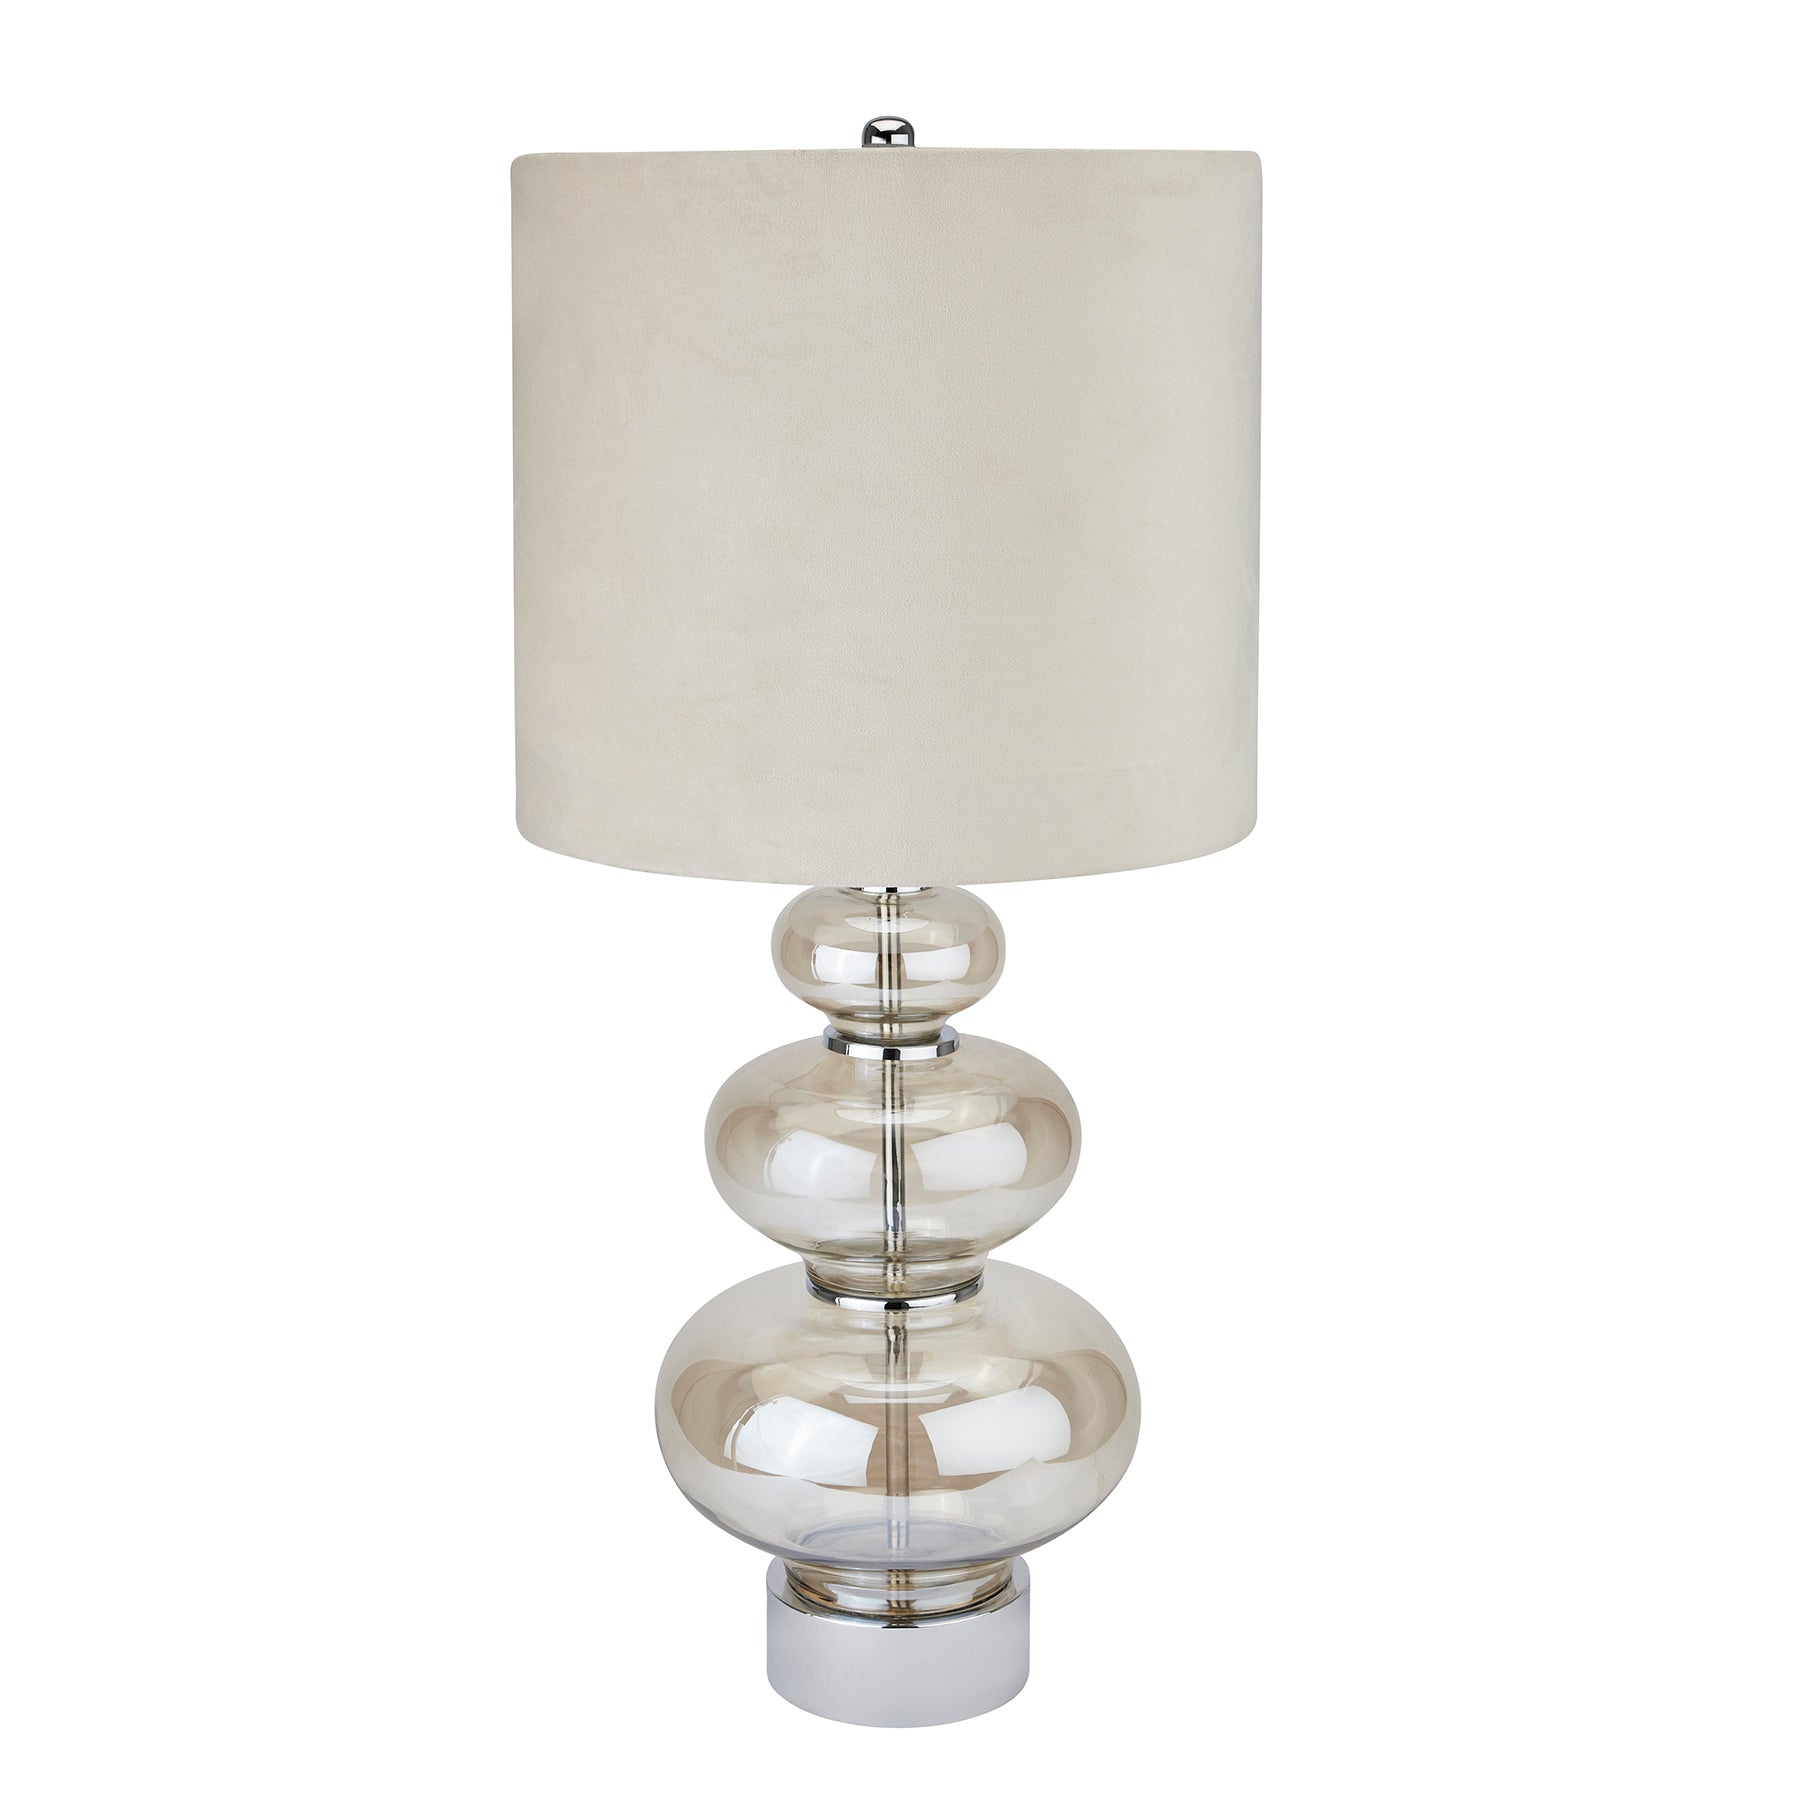 Hill Interiors Table Lamp Justicia Metallic Glass Table Lamp